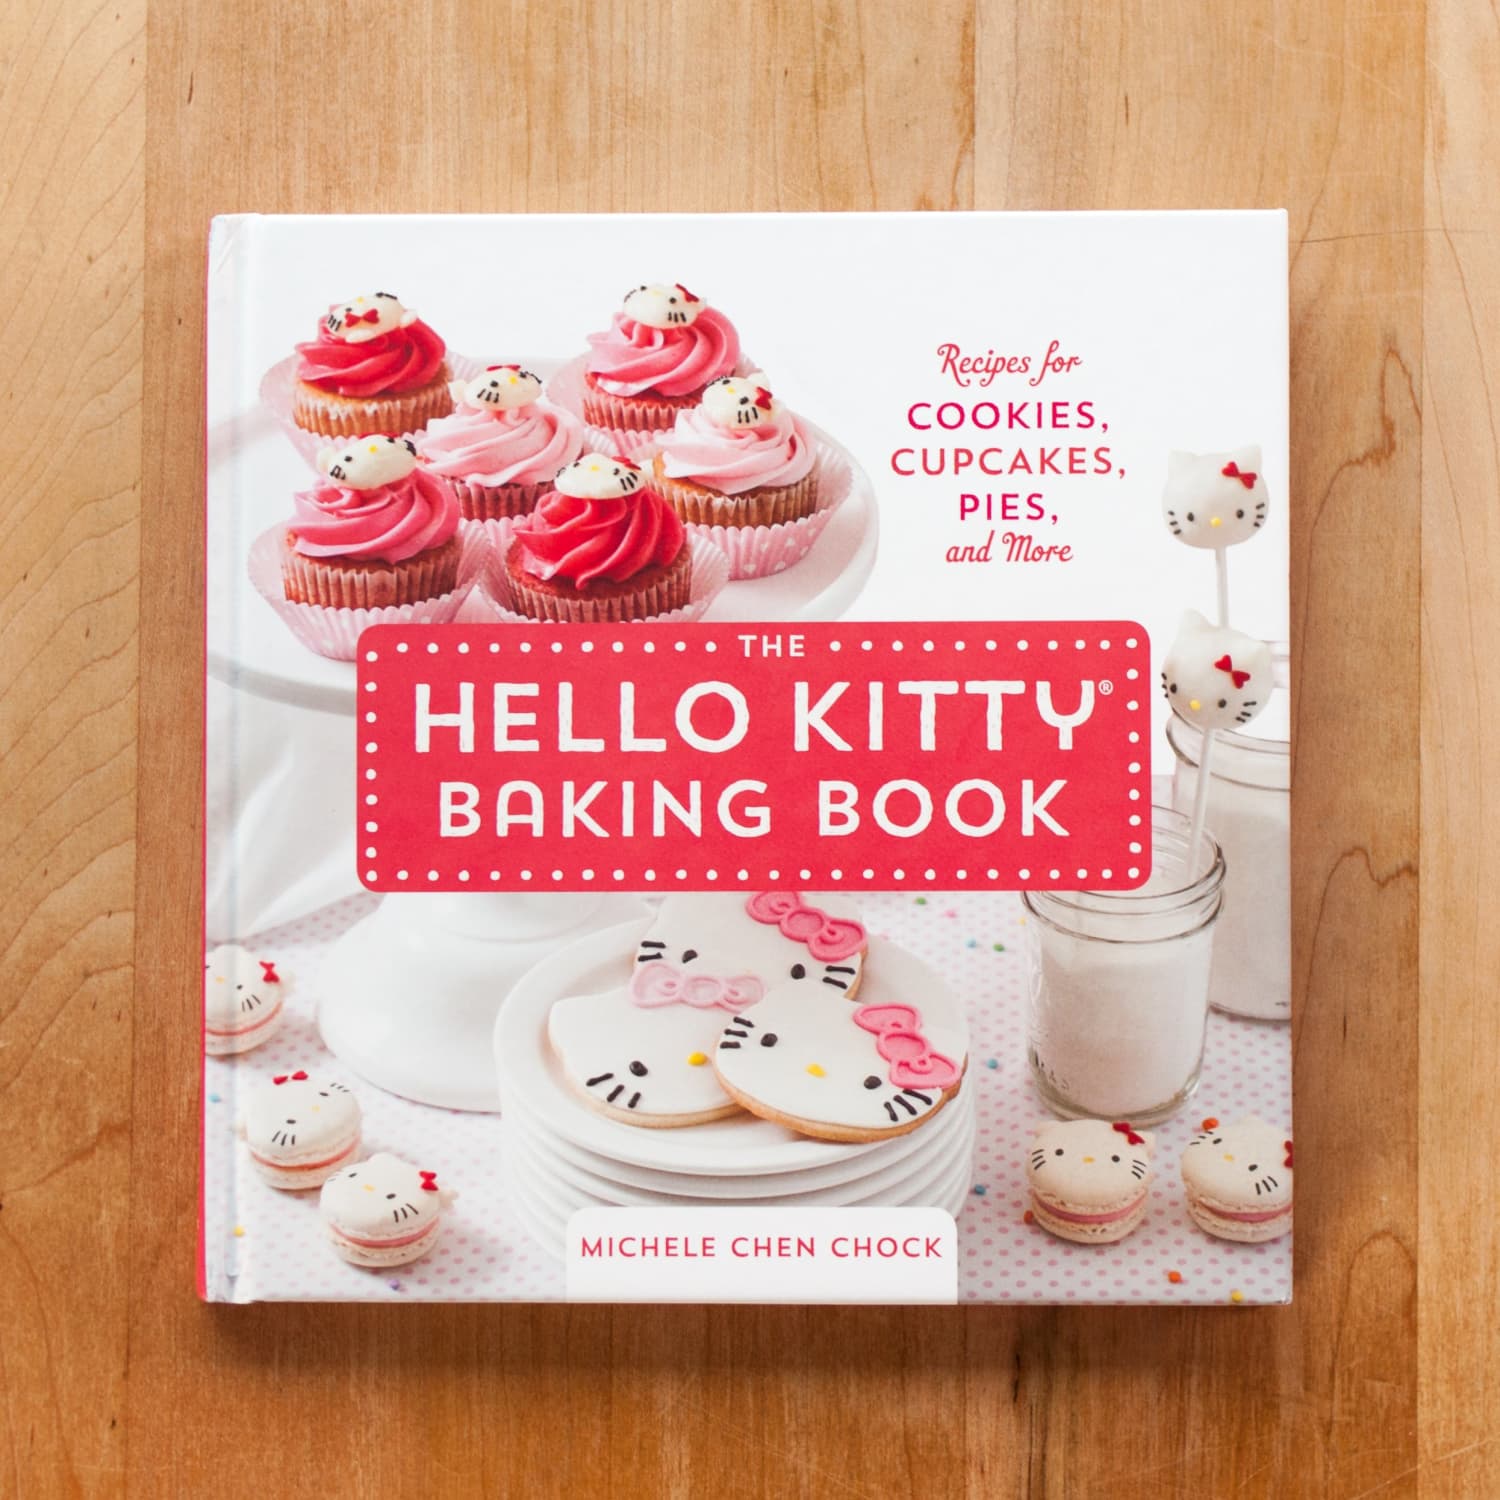 Why Bake a Cake When You Can Bake a Hello Kitty Cake? | Kitchn